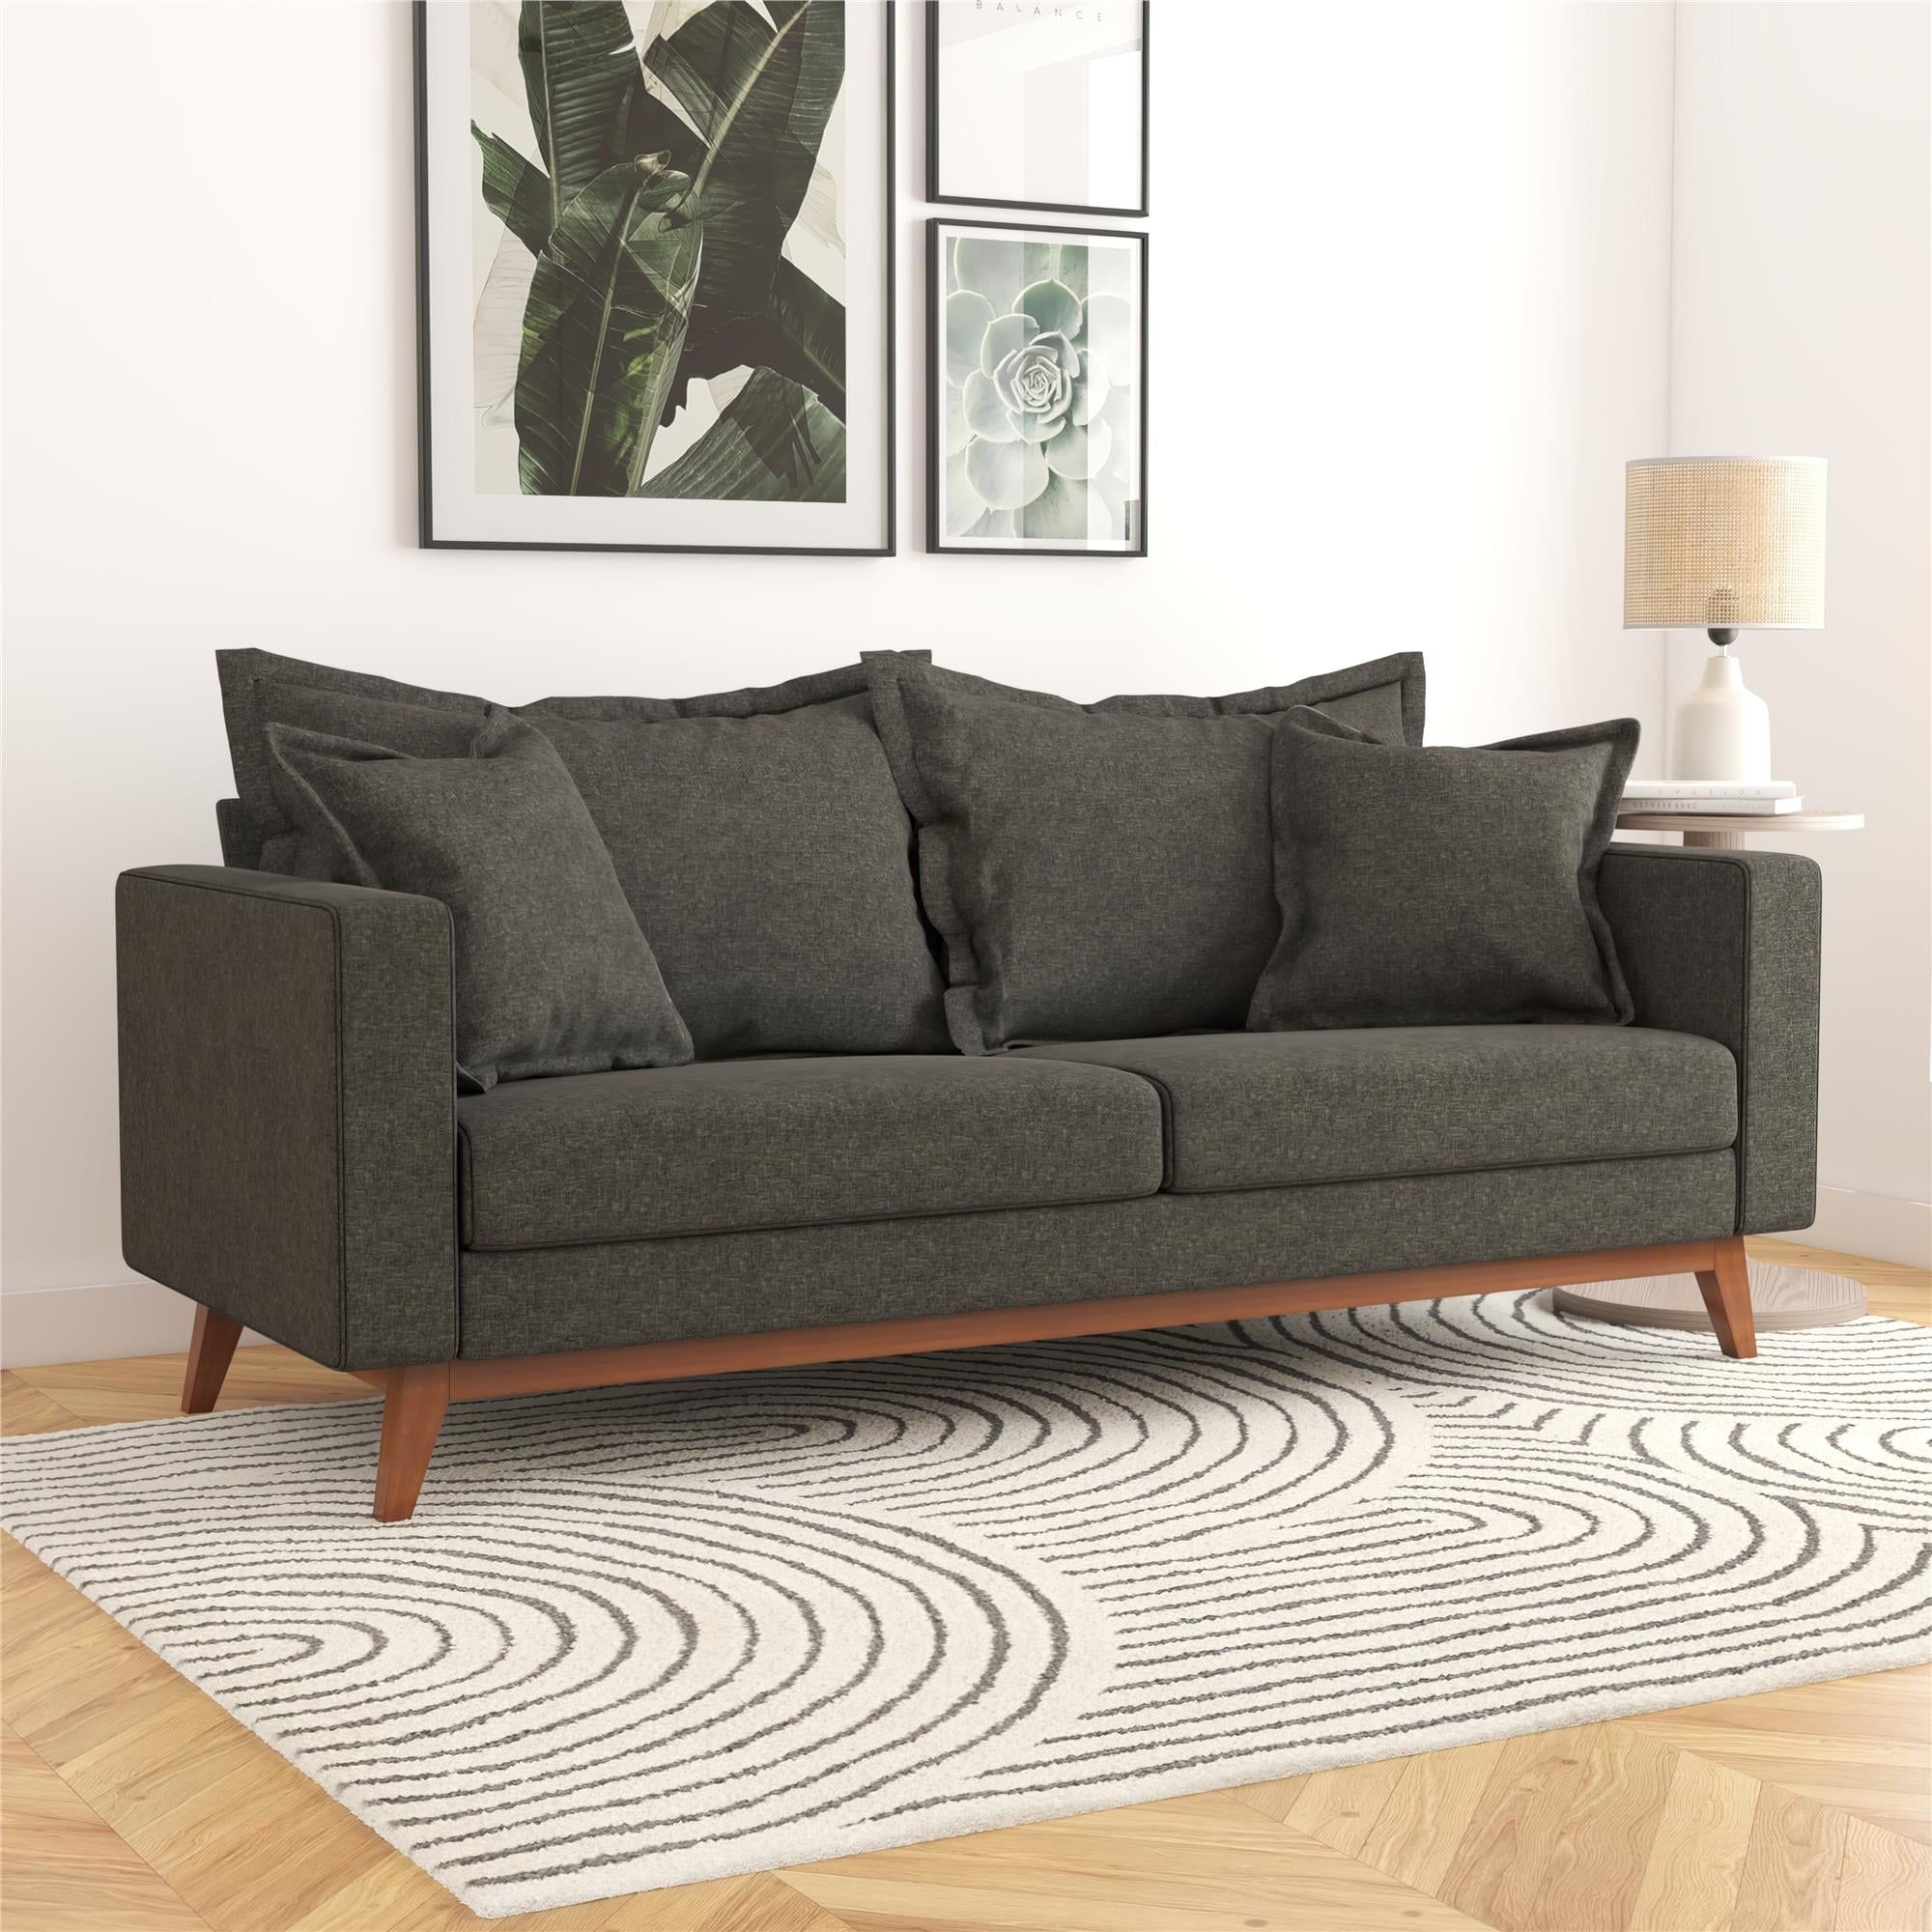 Dhp Miriam Pillowback Wood Base Sofa, Gray Linen – Walmart Intended For Sofas With Pillowback Wood Bases (Photo 1 of 15)